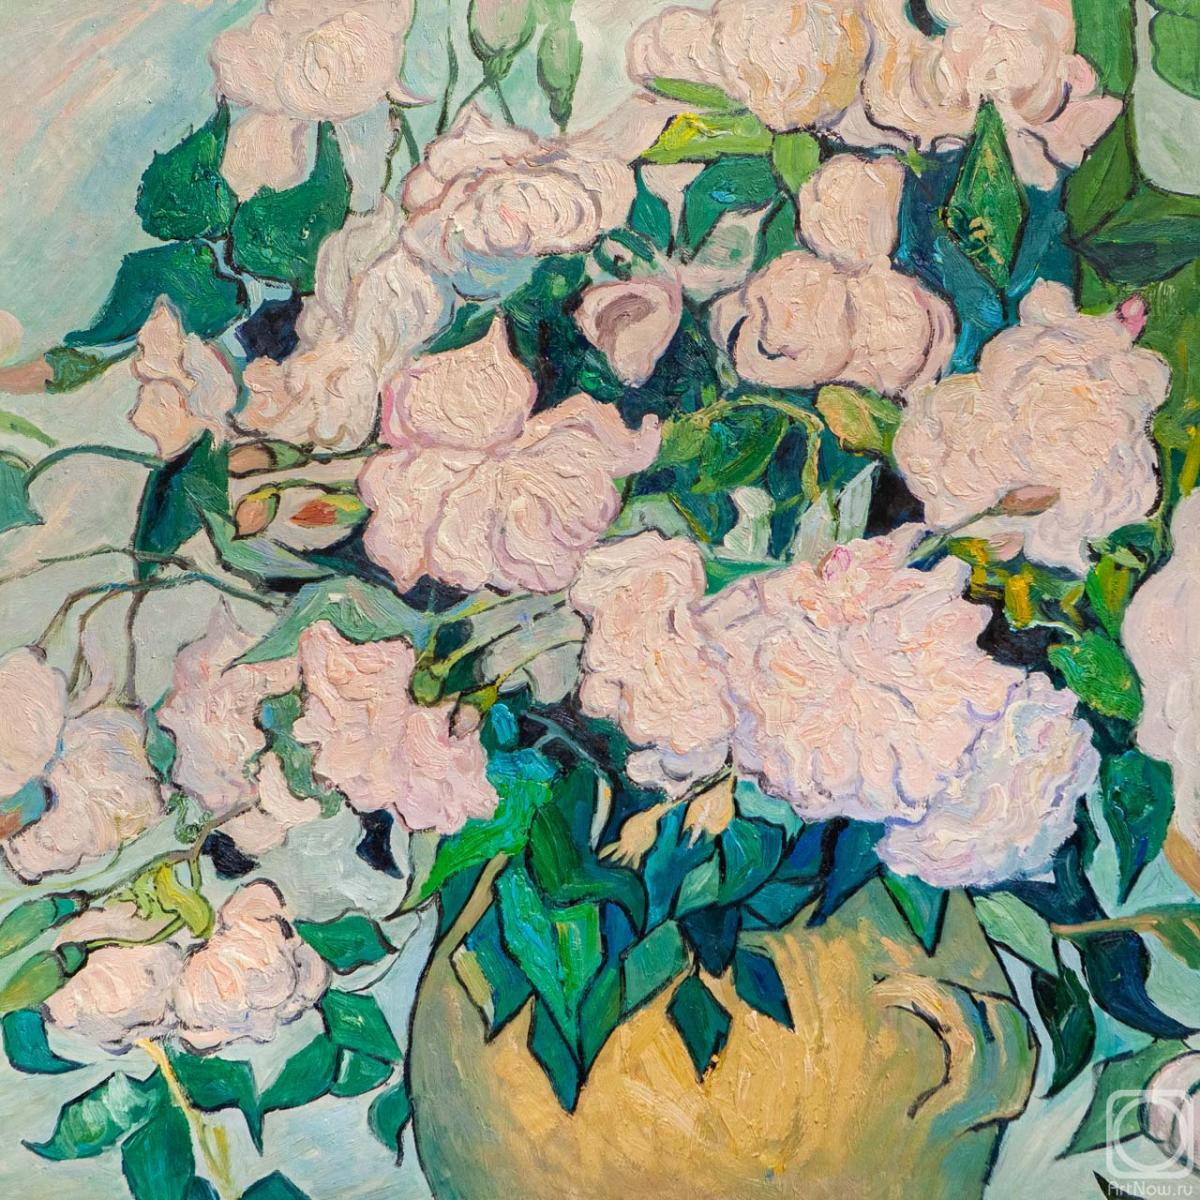 Vlodarchik Andjei. A free copy of Van Gogh's painting *Vase with Roses*